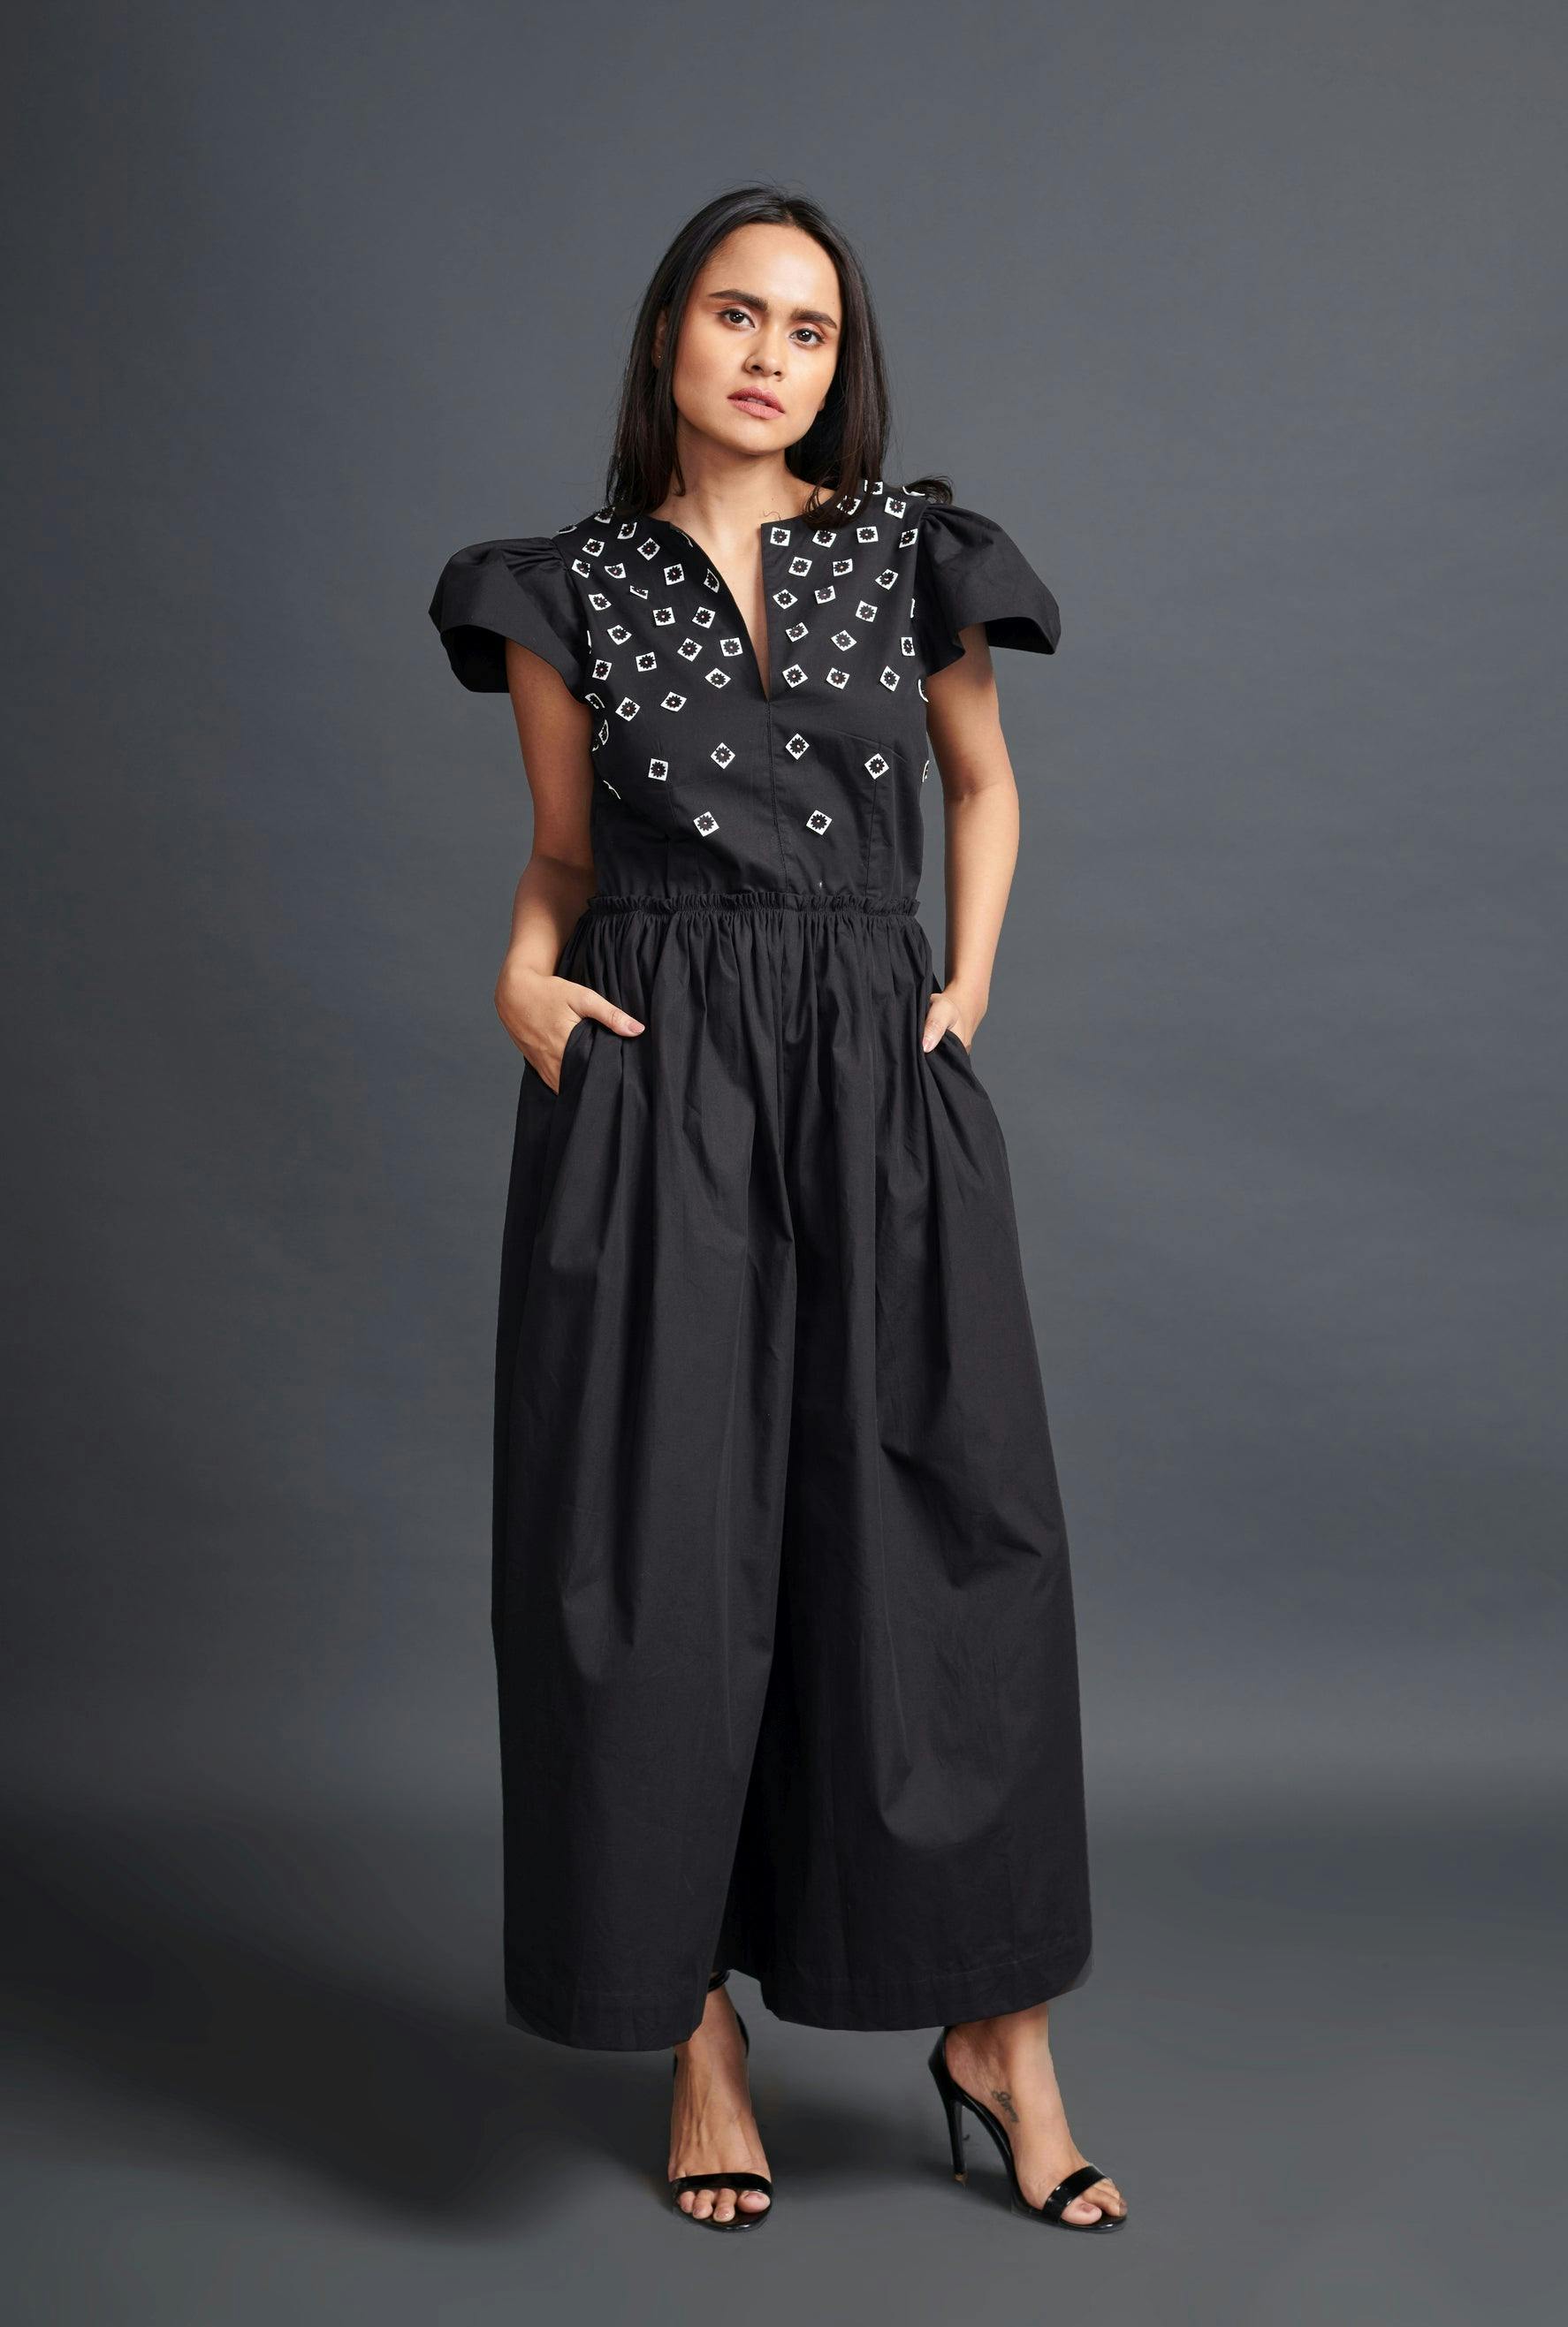 WF-1103-BLACK ::: Black Jumpsuit With Embroidery, a product by Deepika Arora